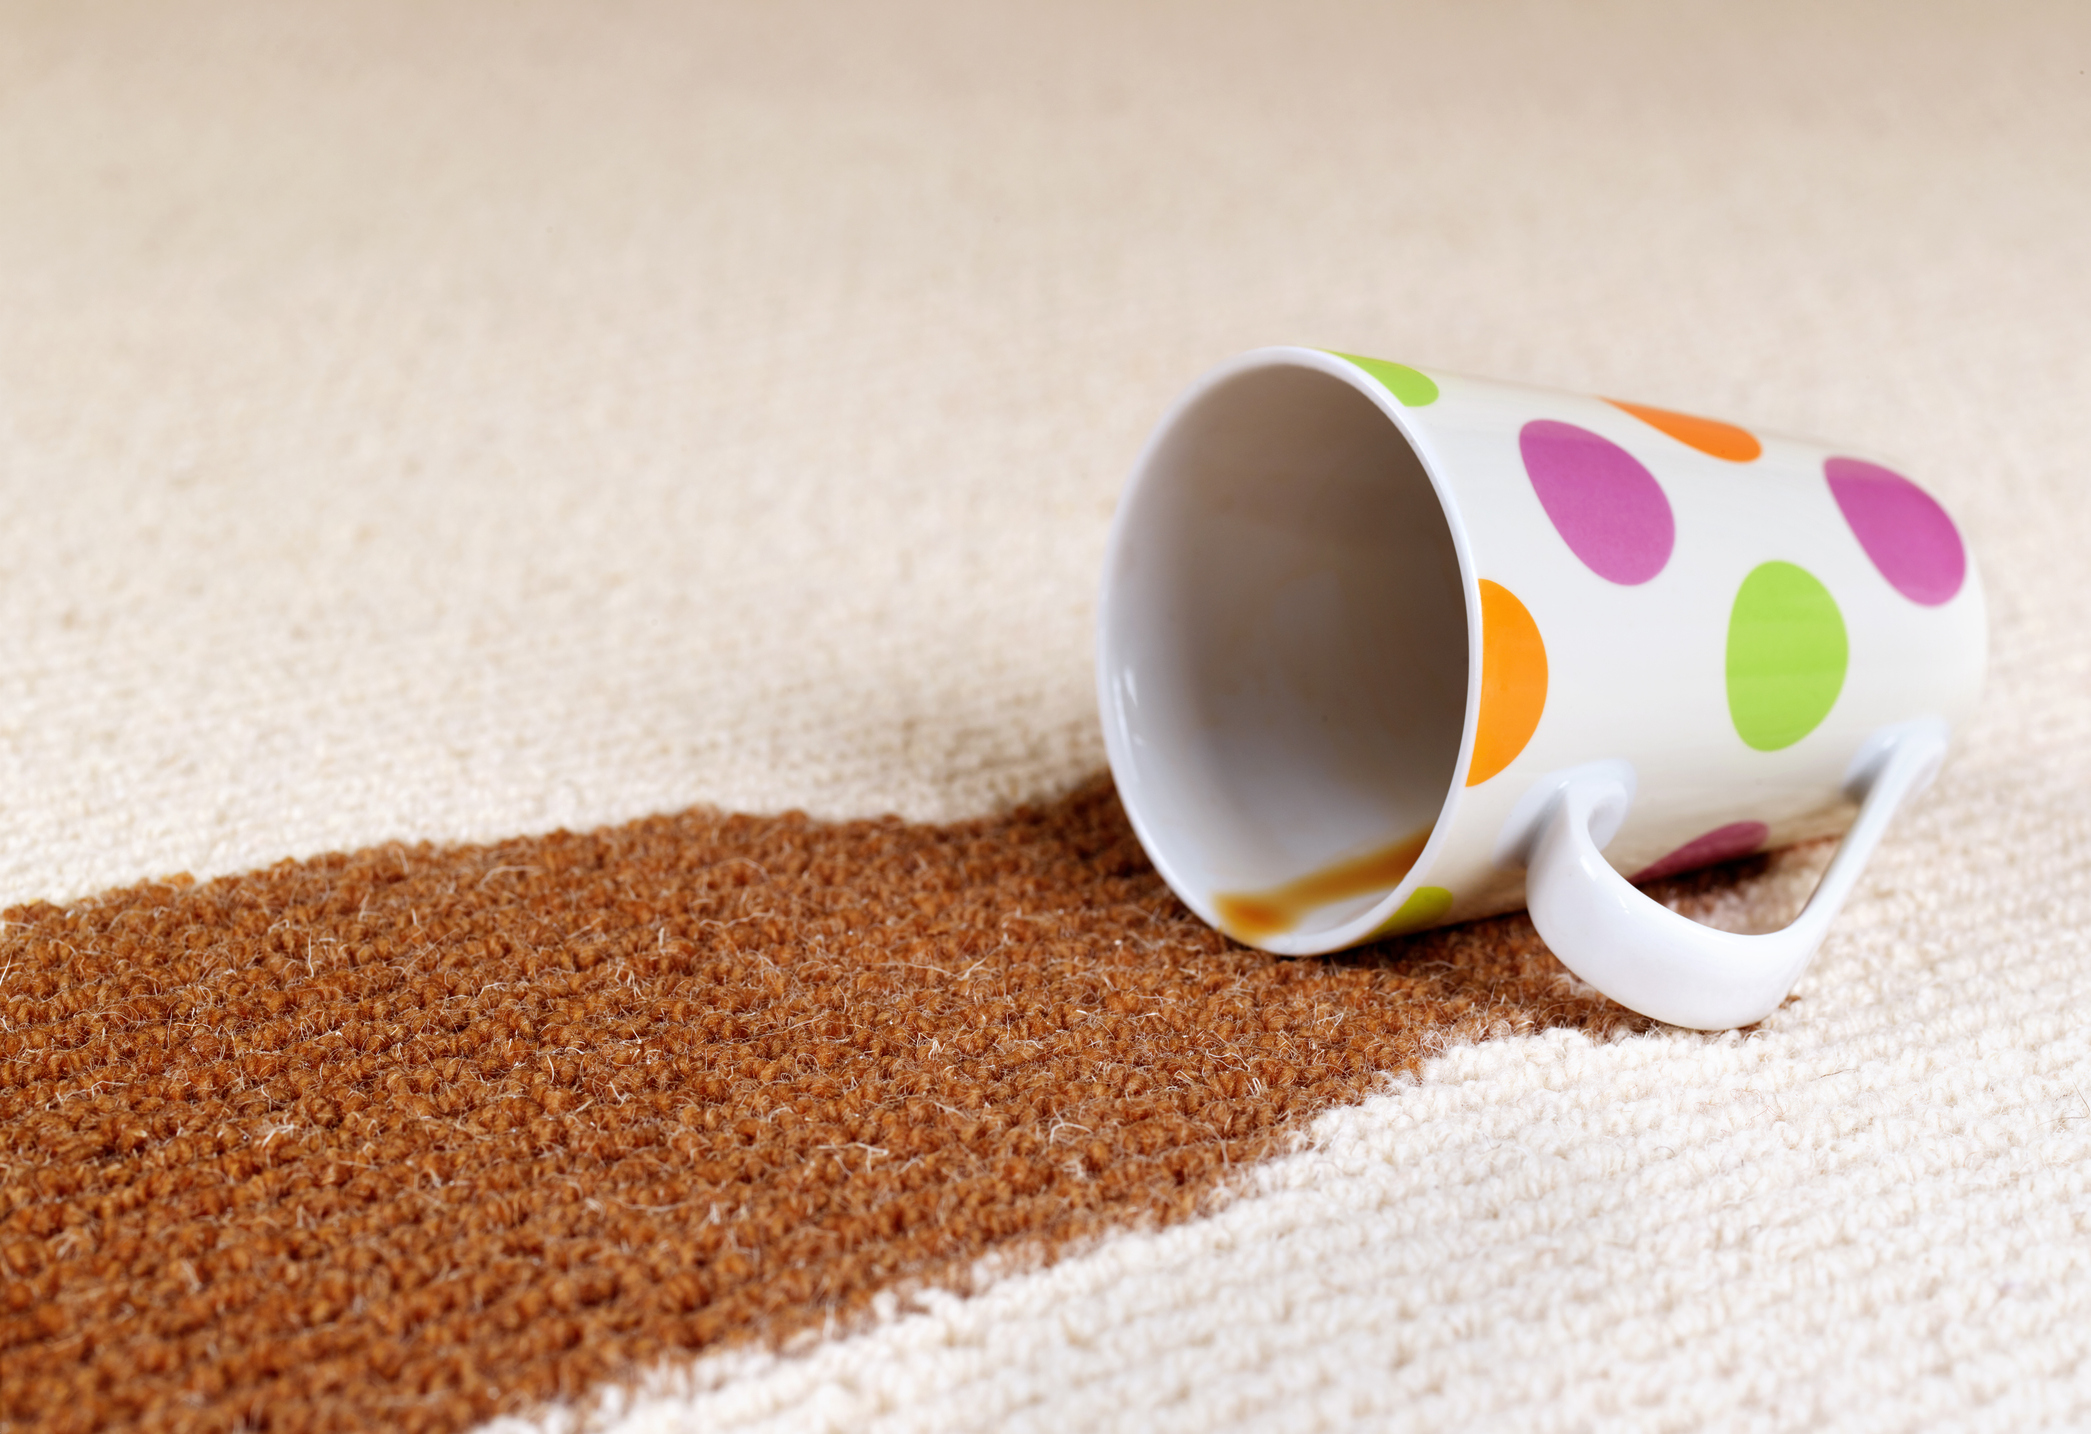 Coffee spilled on carpet; communicating with crypto communities